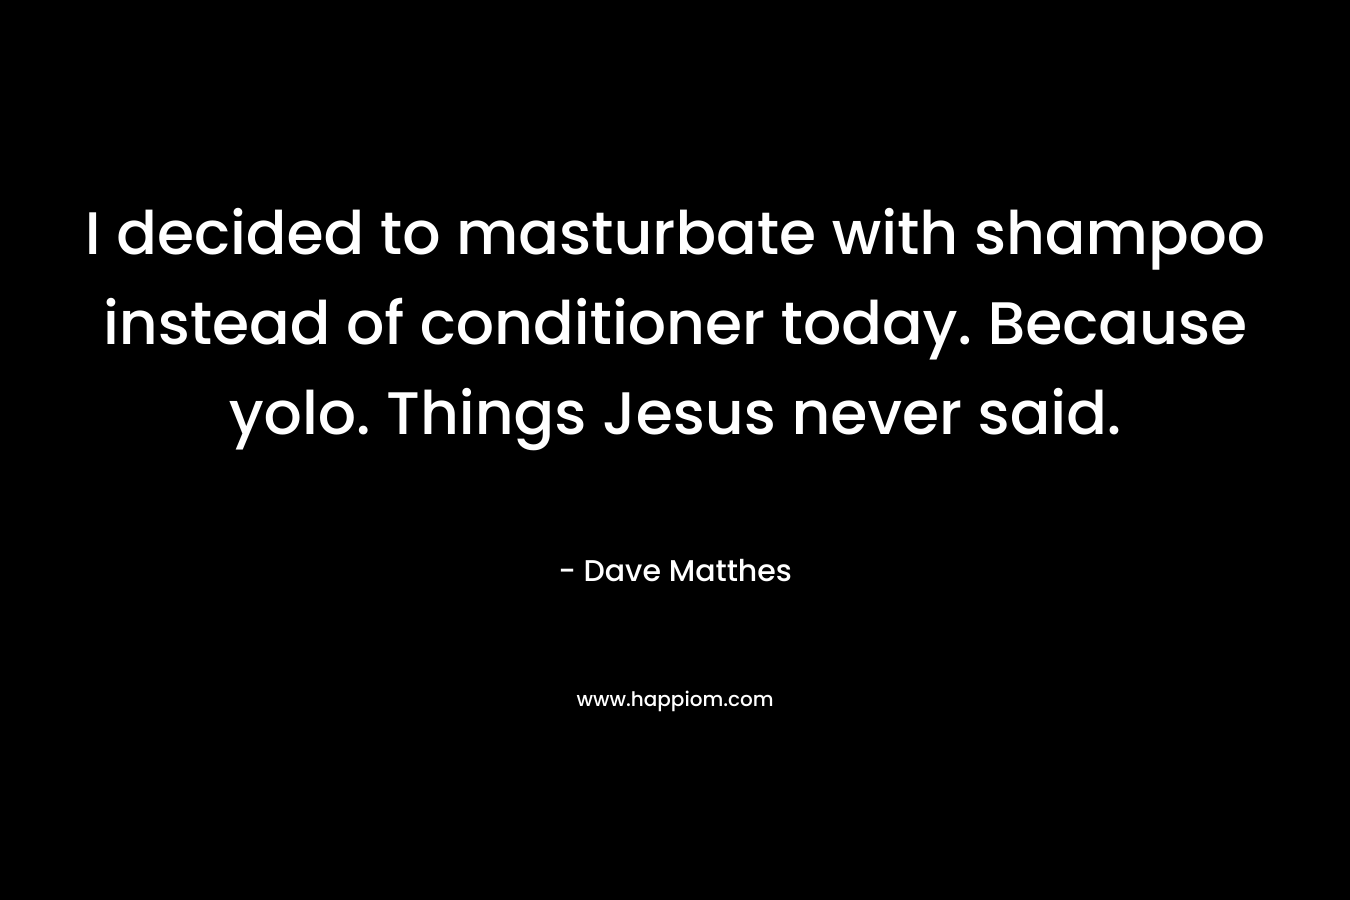 I decided to masturbate with shampoo instead of conditioner today. Because yolo. Things Jesus never said. – Dave Matthes